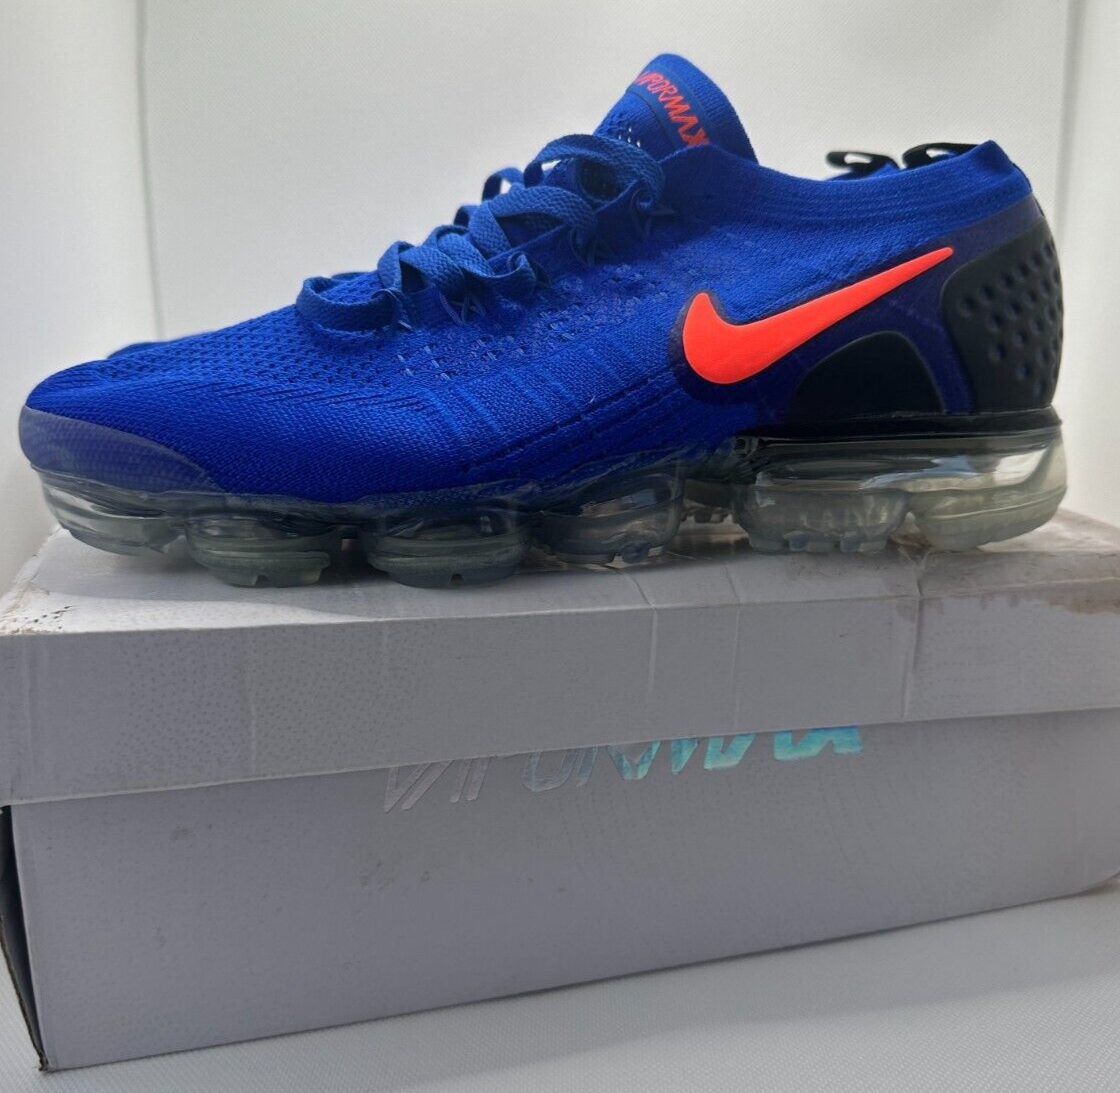 Nike Mens 10 Air VaporMax Flyknit 2 Racer Blue Running Shoes Sneakers 942842-400